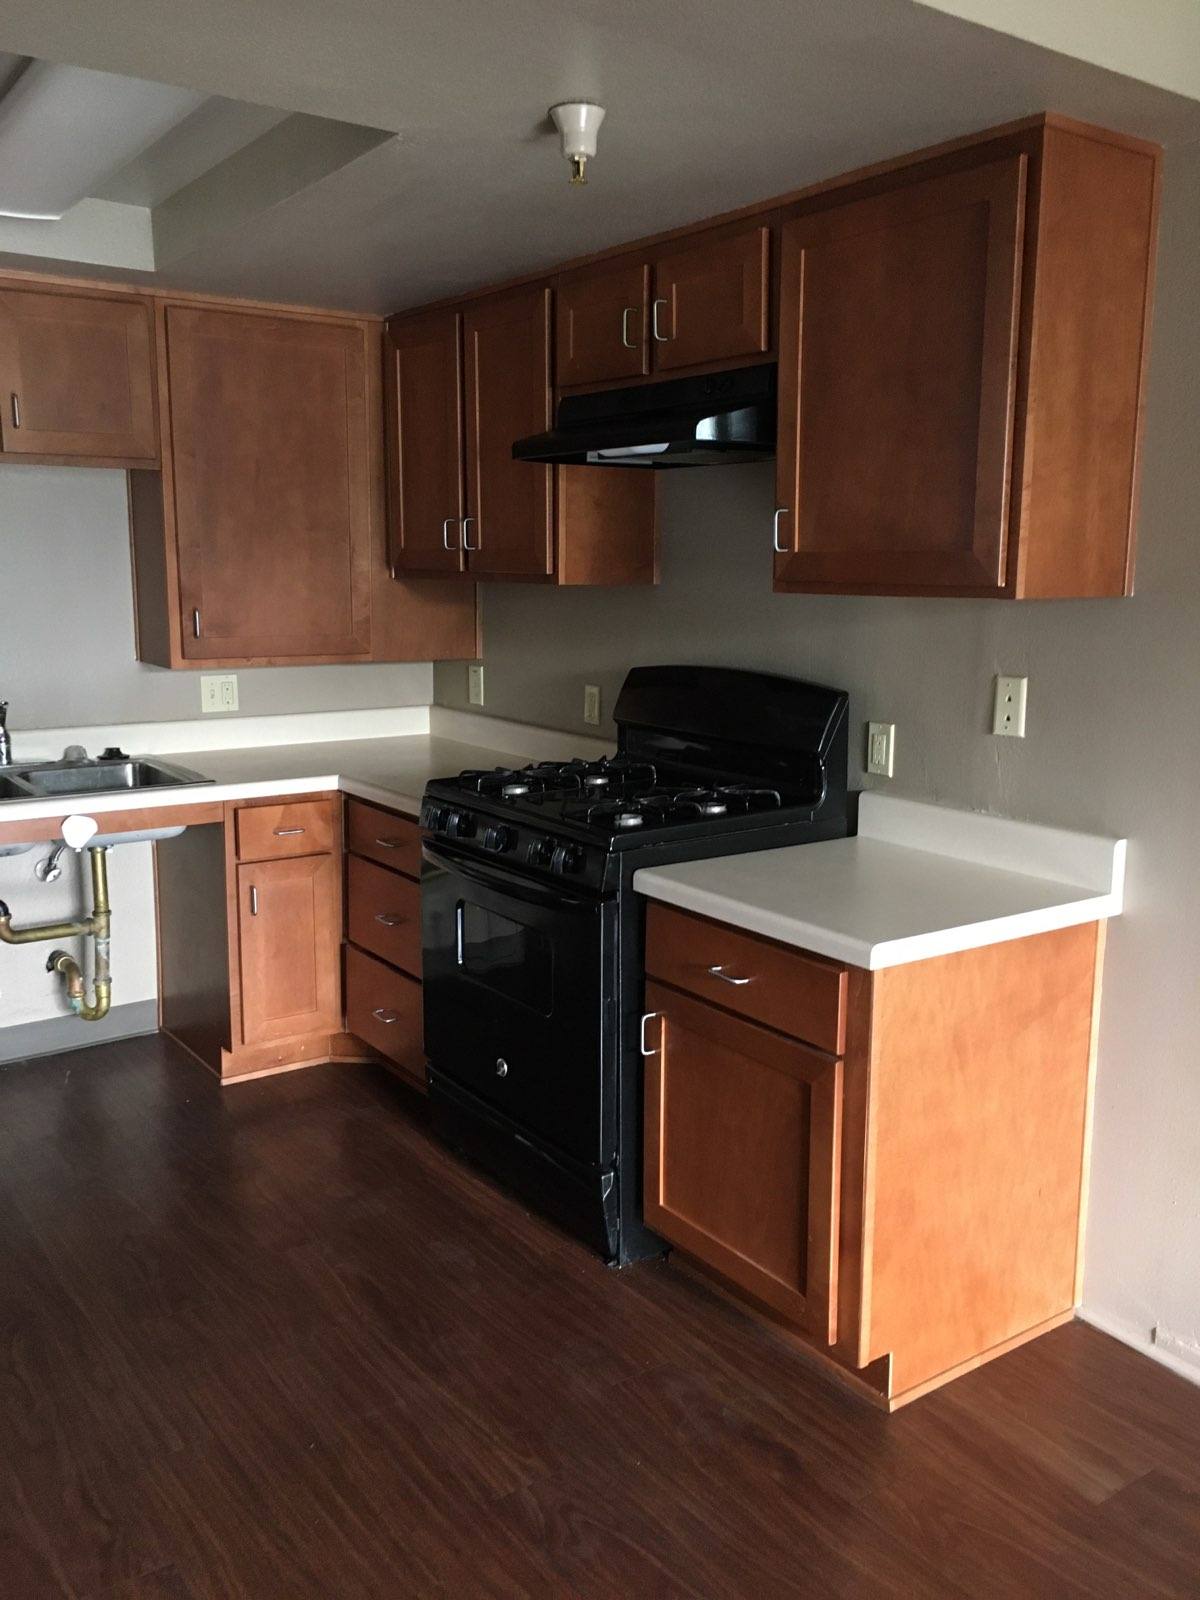 View of upper and lower kitchen cabinets, white countertops, black stove and hood, and wheelchair accessible sink.